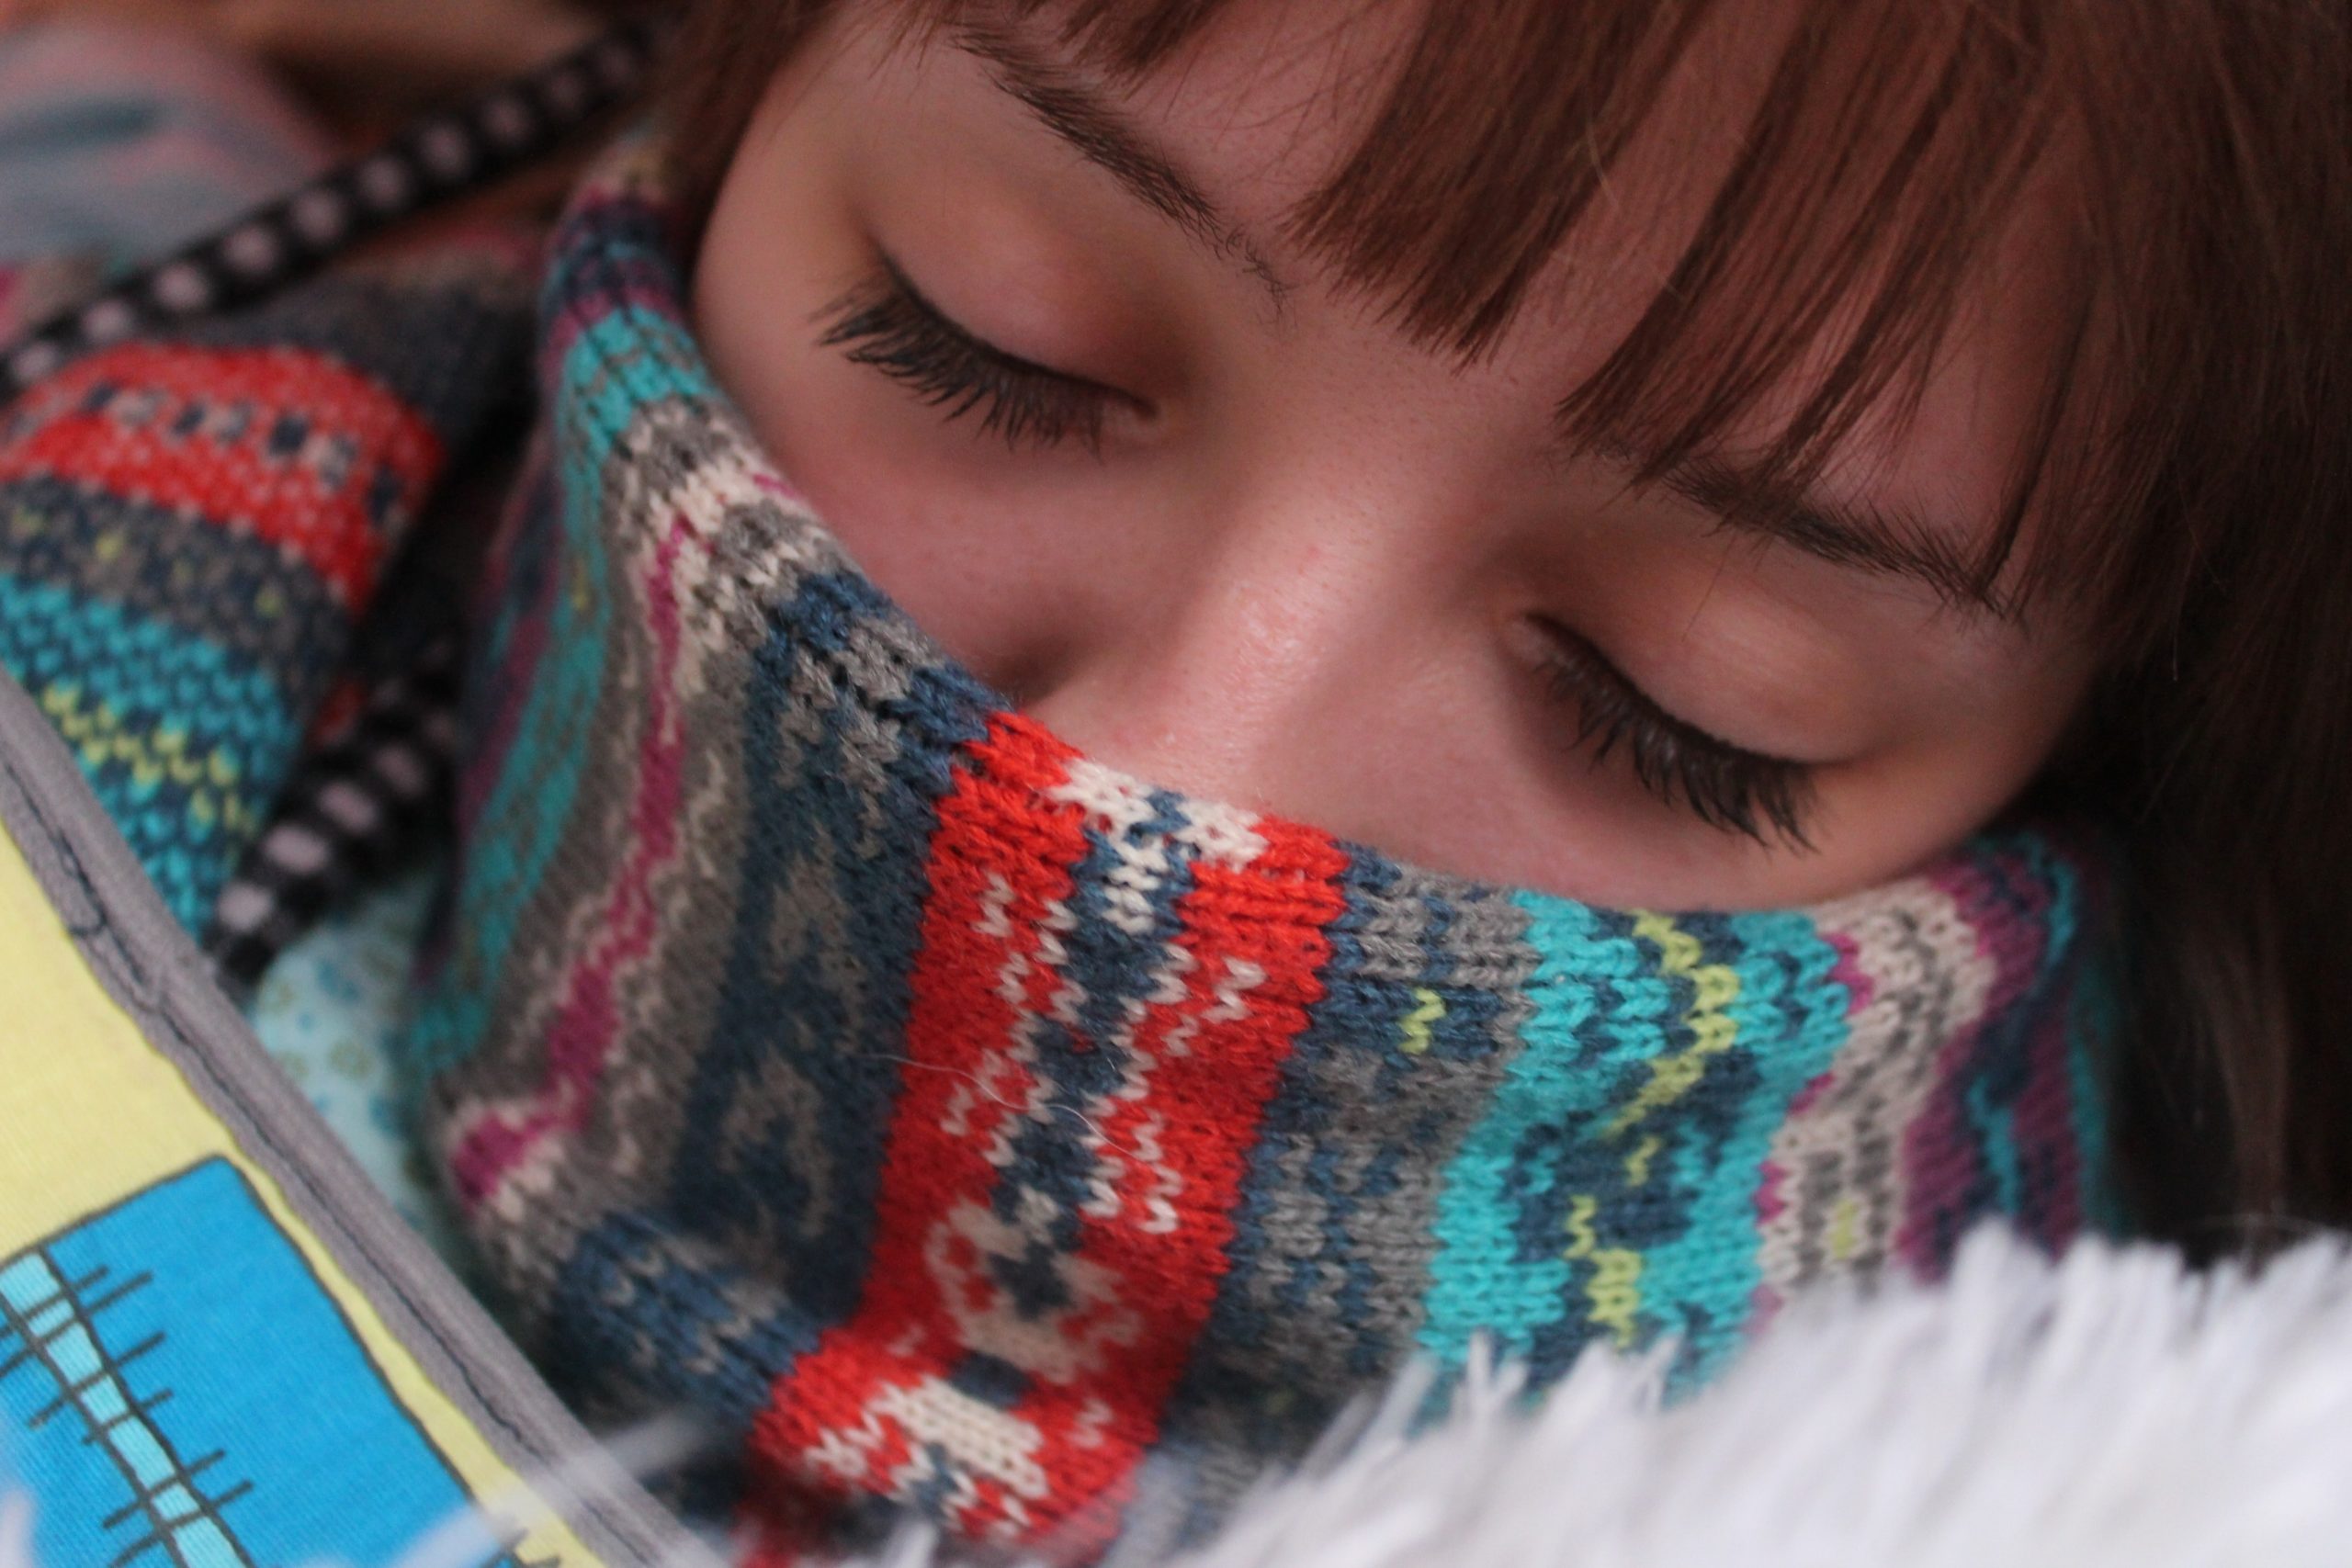 Sick woman with scarf over nose during cold and flu season